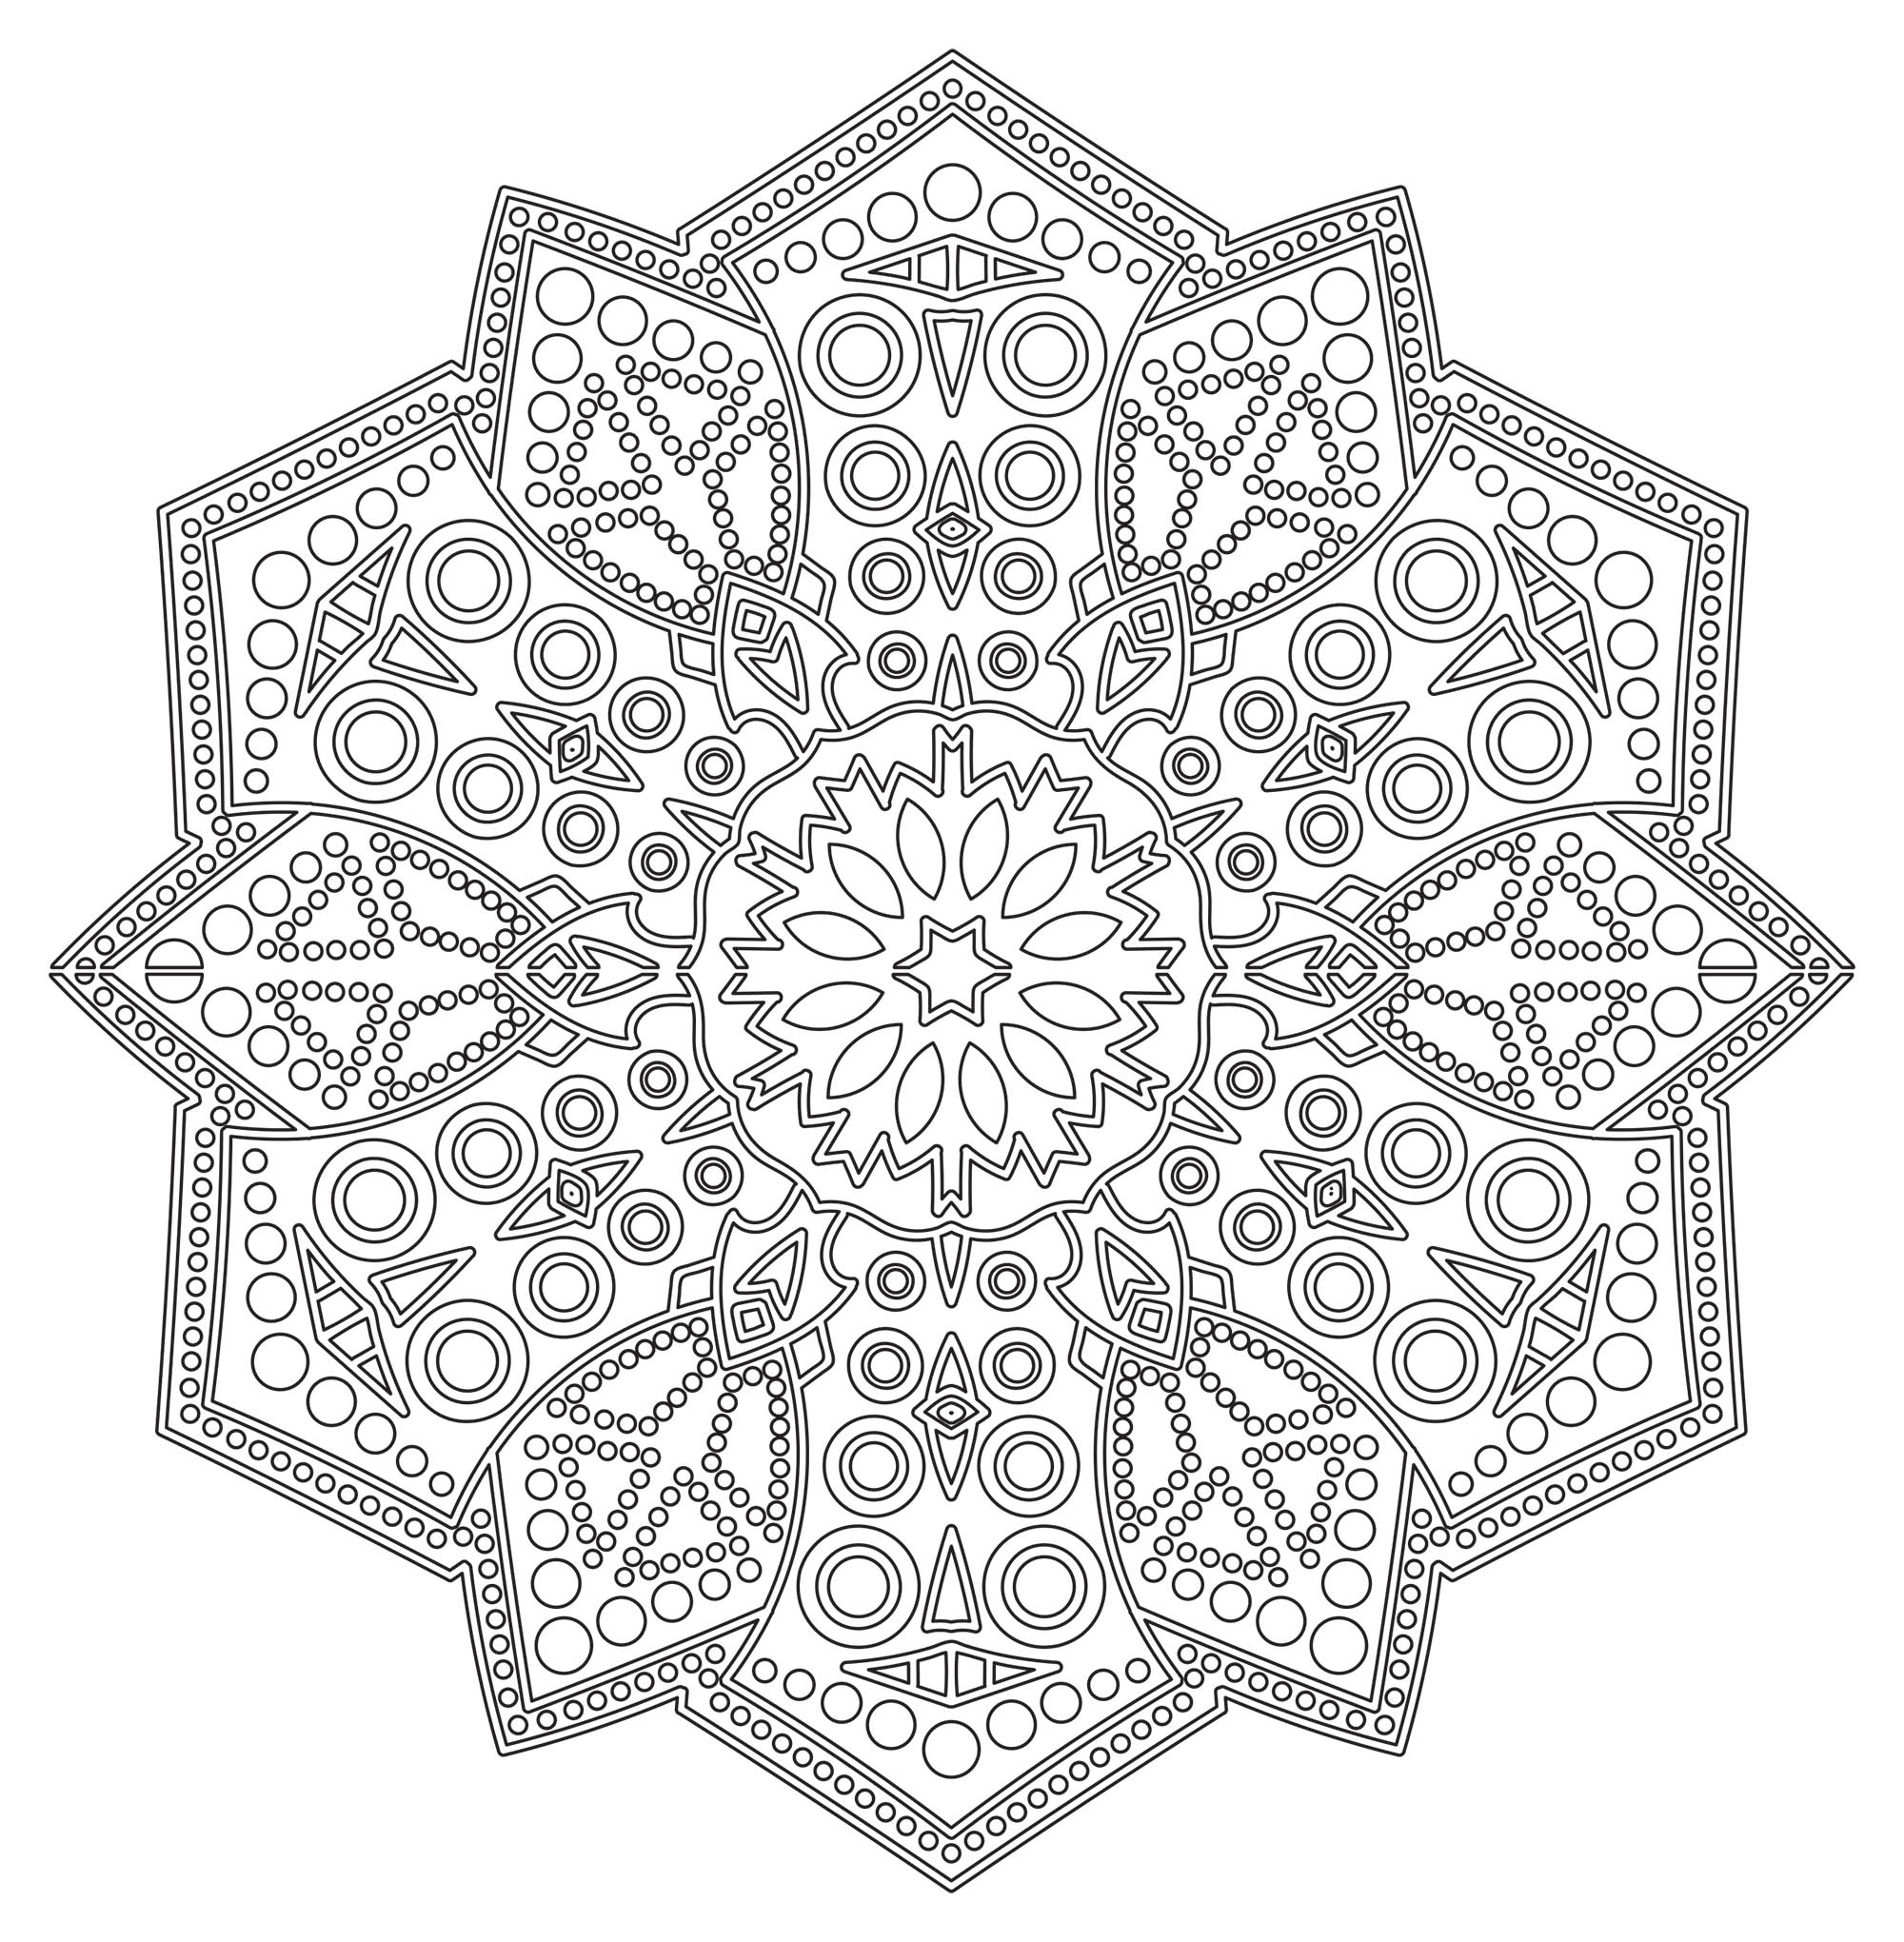 A Mandala guaranteed 100% Relaxation, for a pure ZEN moment. You will quickly feel the benefits of coloring.